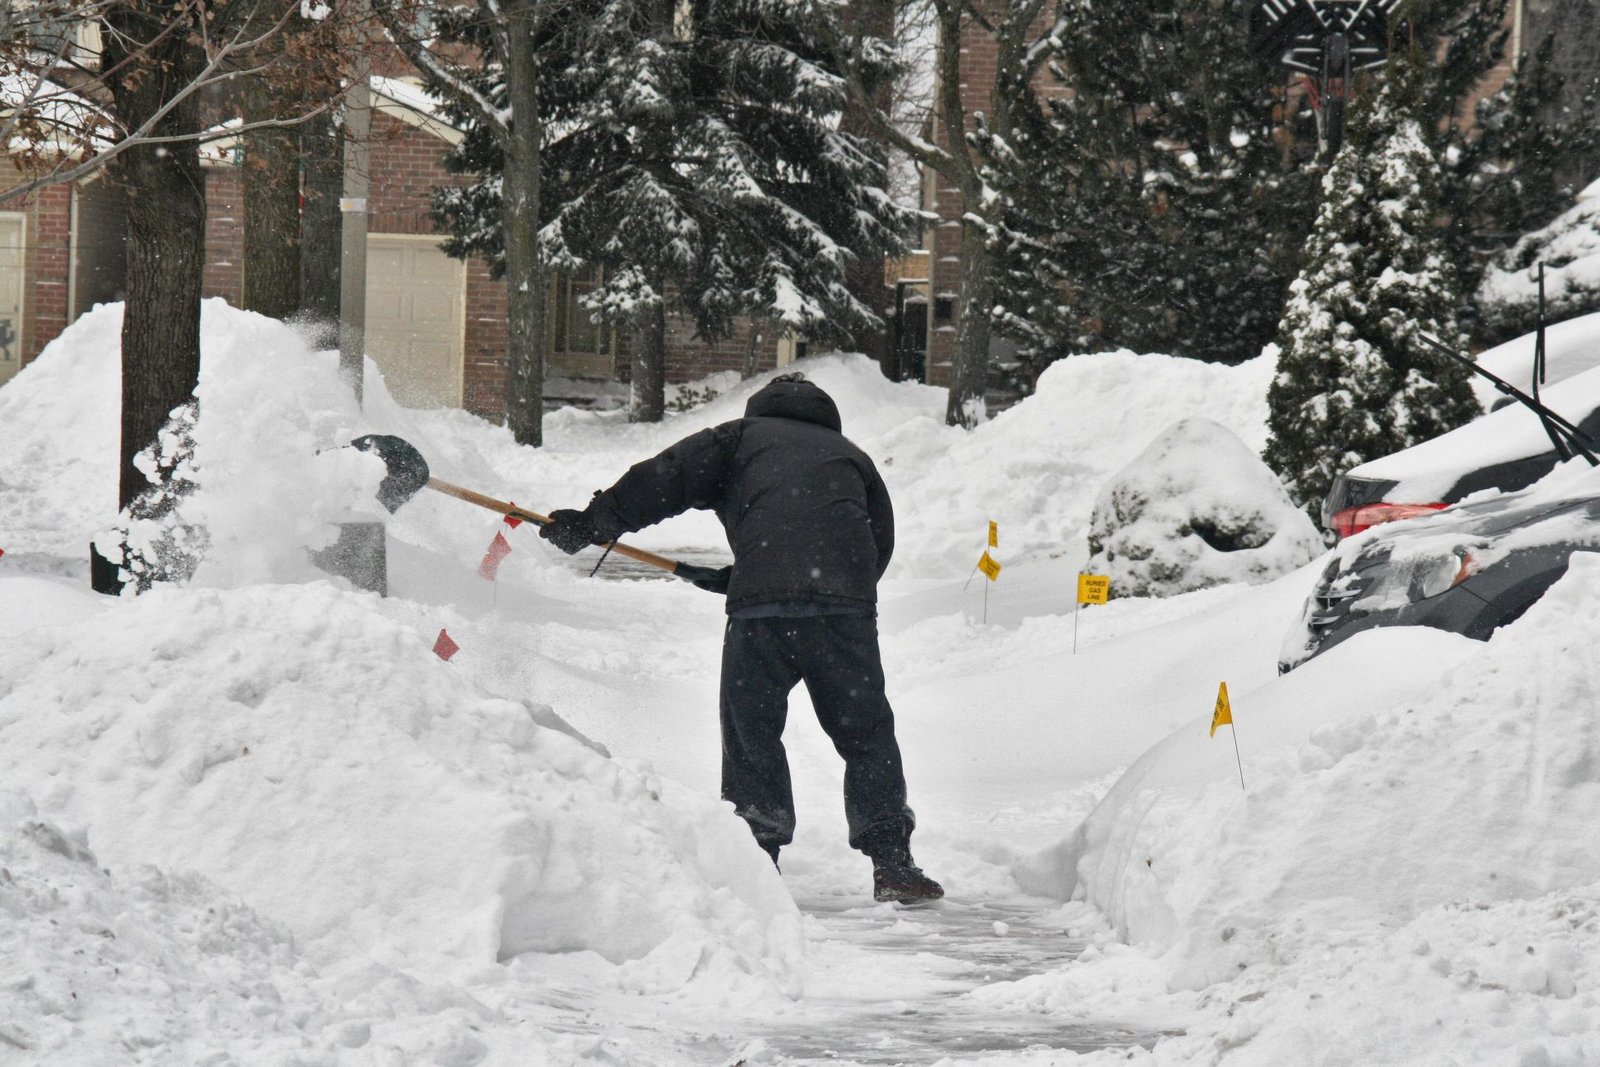 residents-dig-themselves-out-after-a-massive-snowstorm-hit-news-photo-1579300505